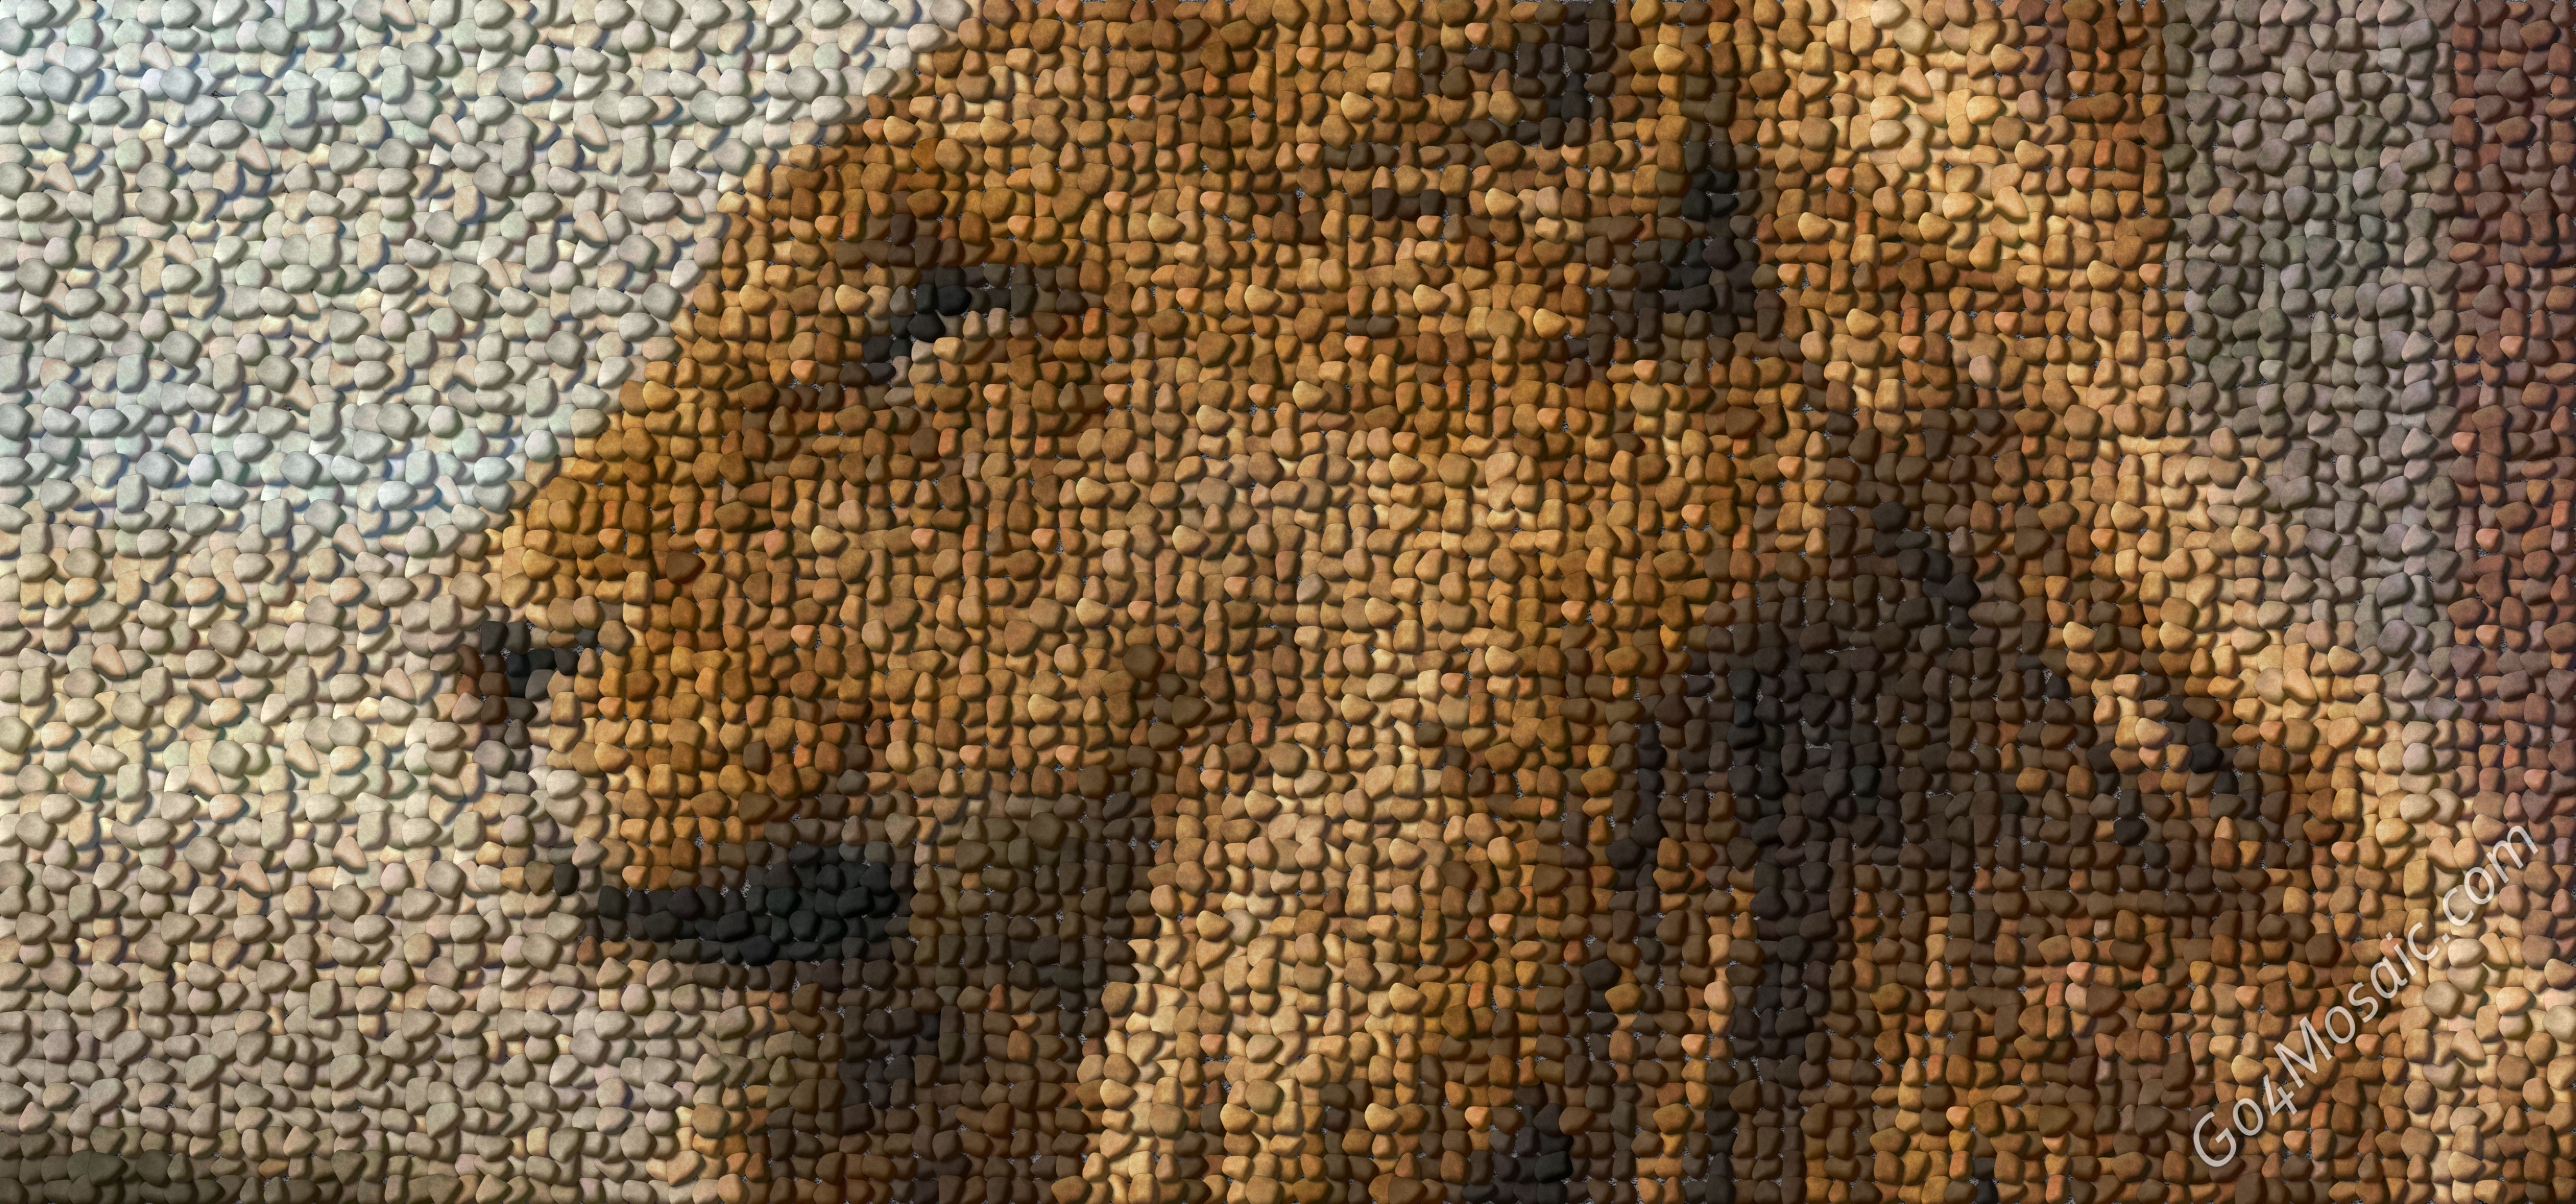 Aslan /The Chronicles of Narnia/ mosaic from Pebbles